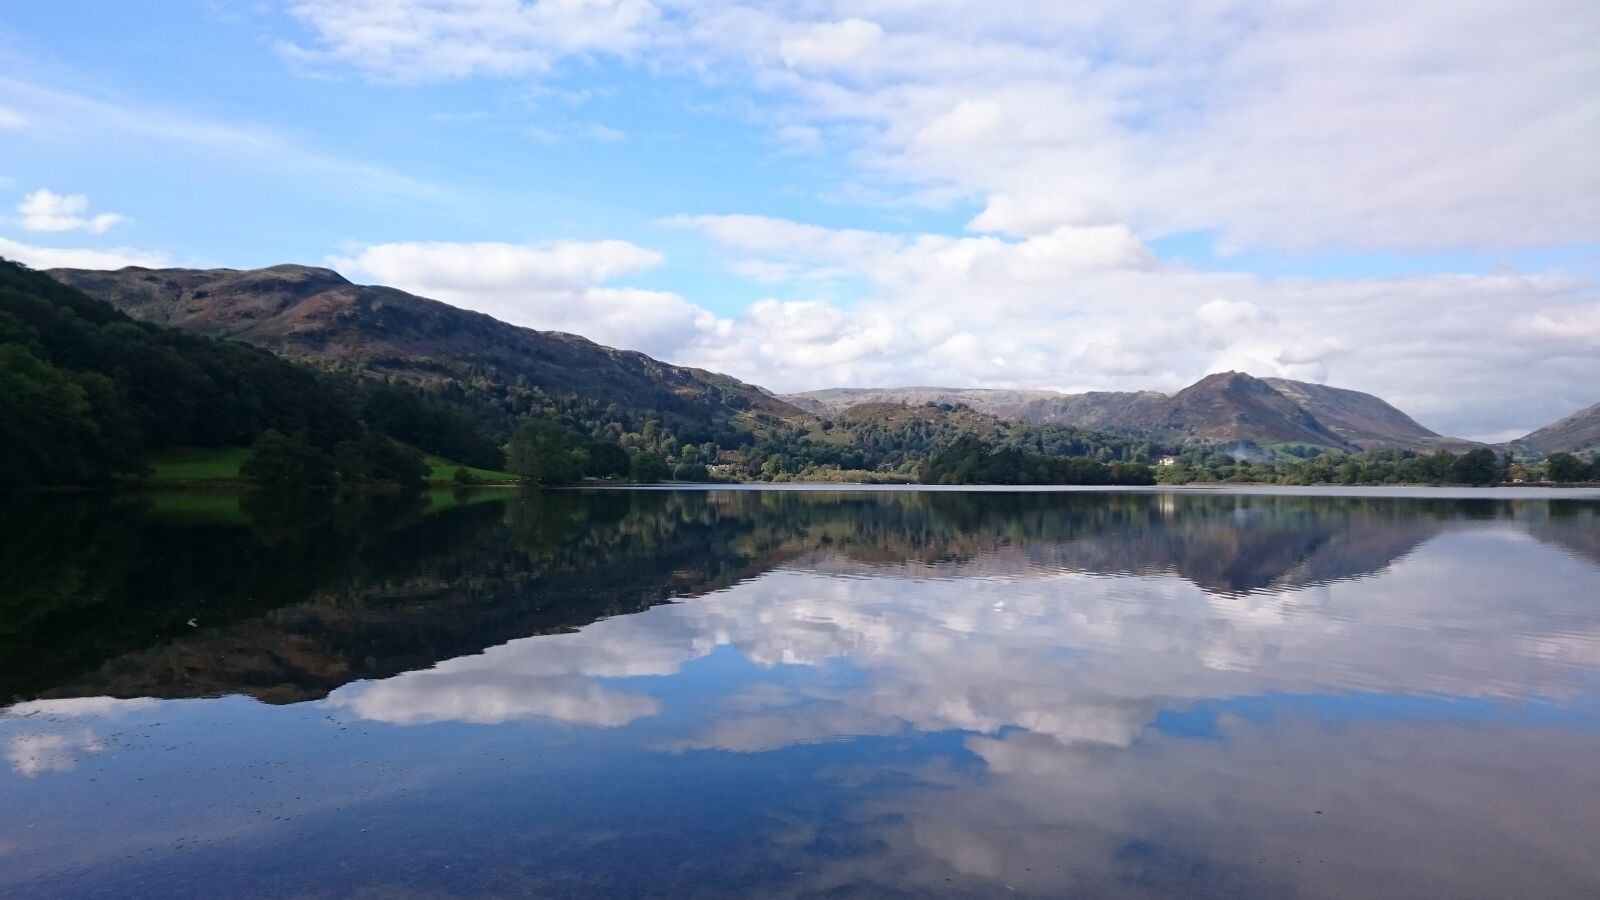 Sony Xperia Z3 Compact sample photo. Lake, grasmere, nature photography